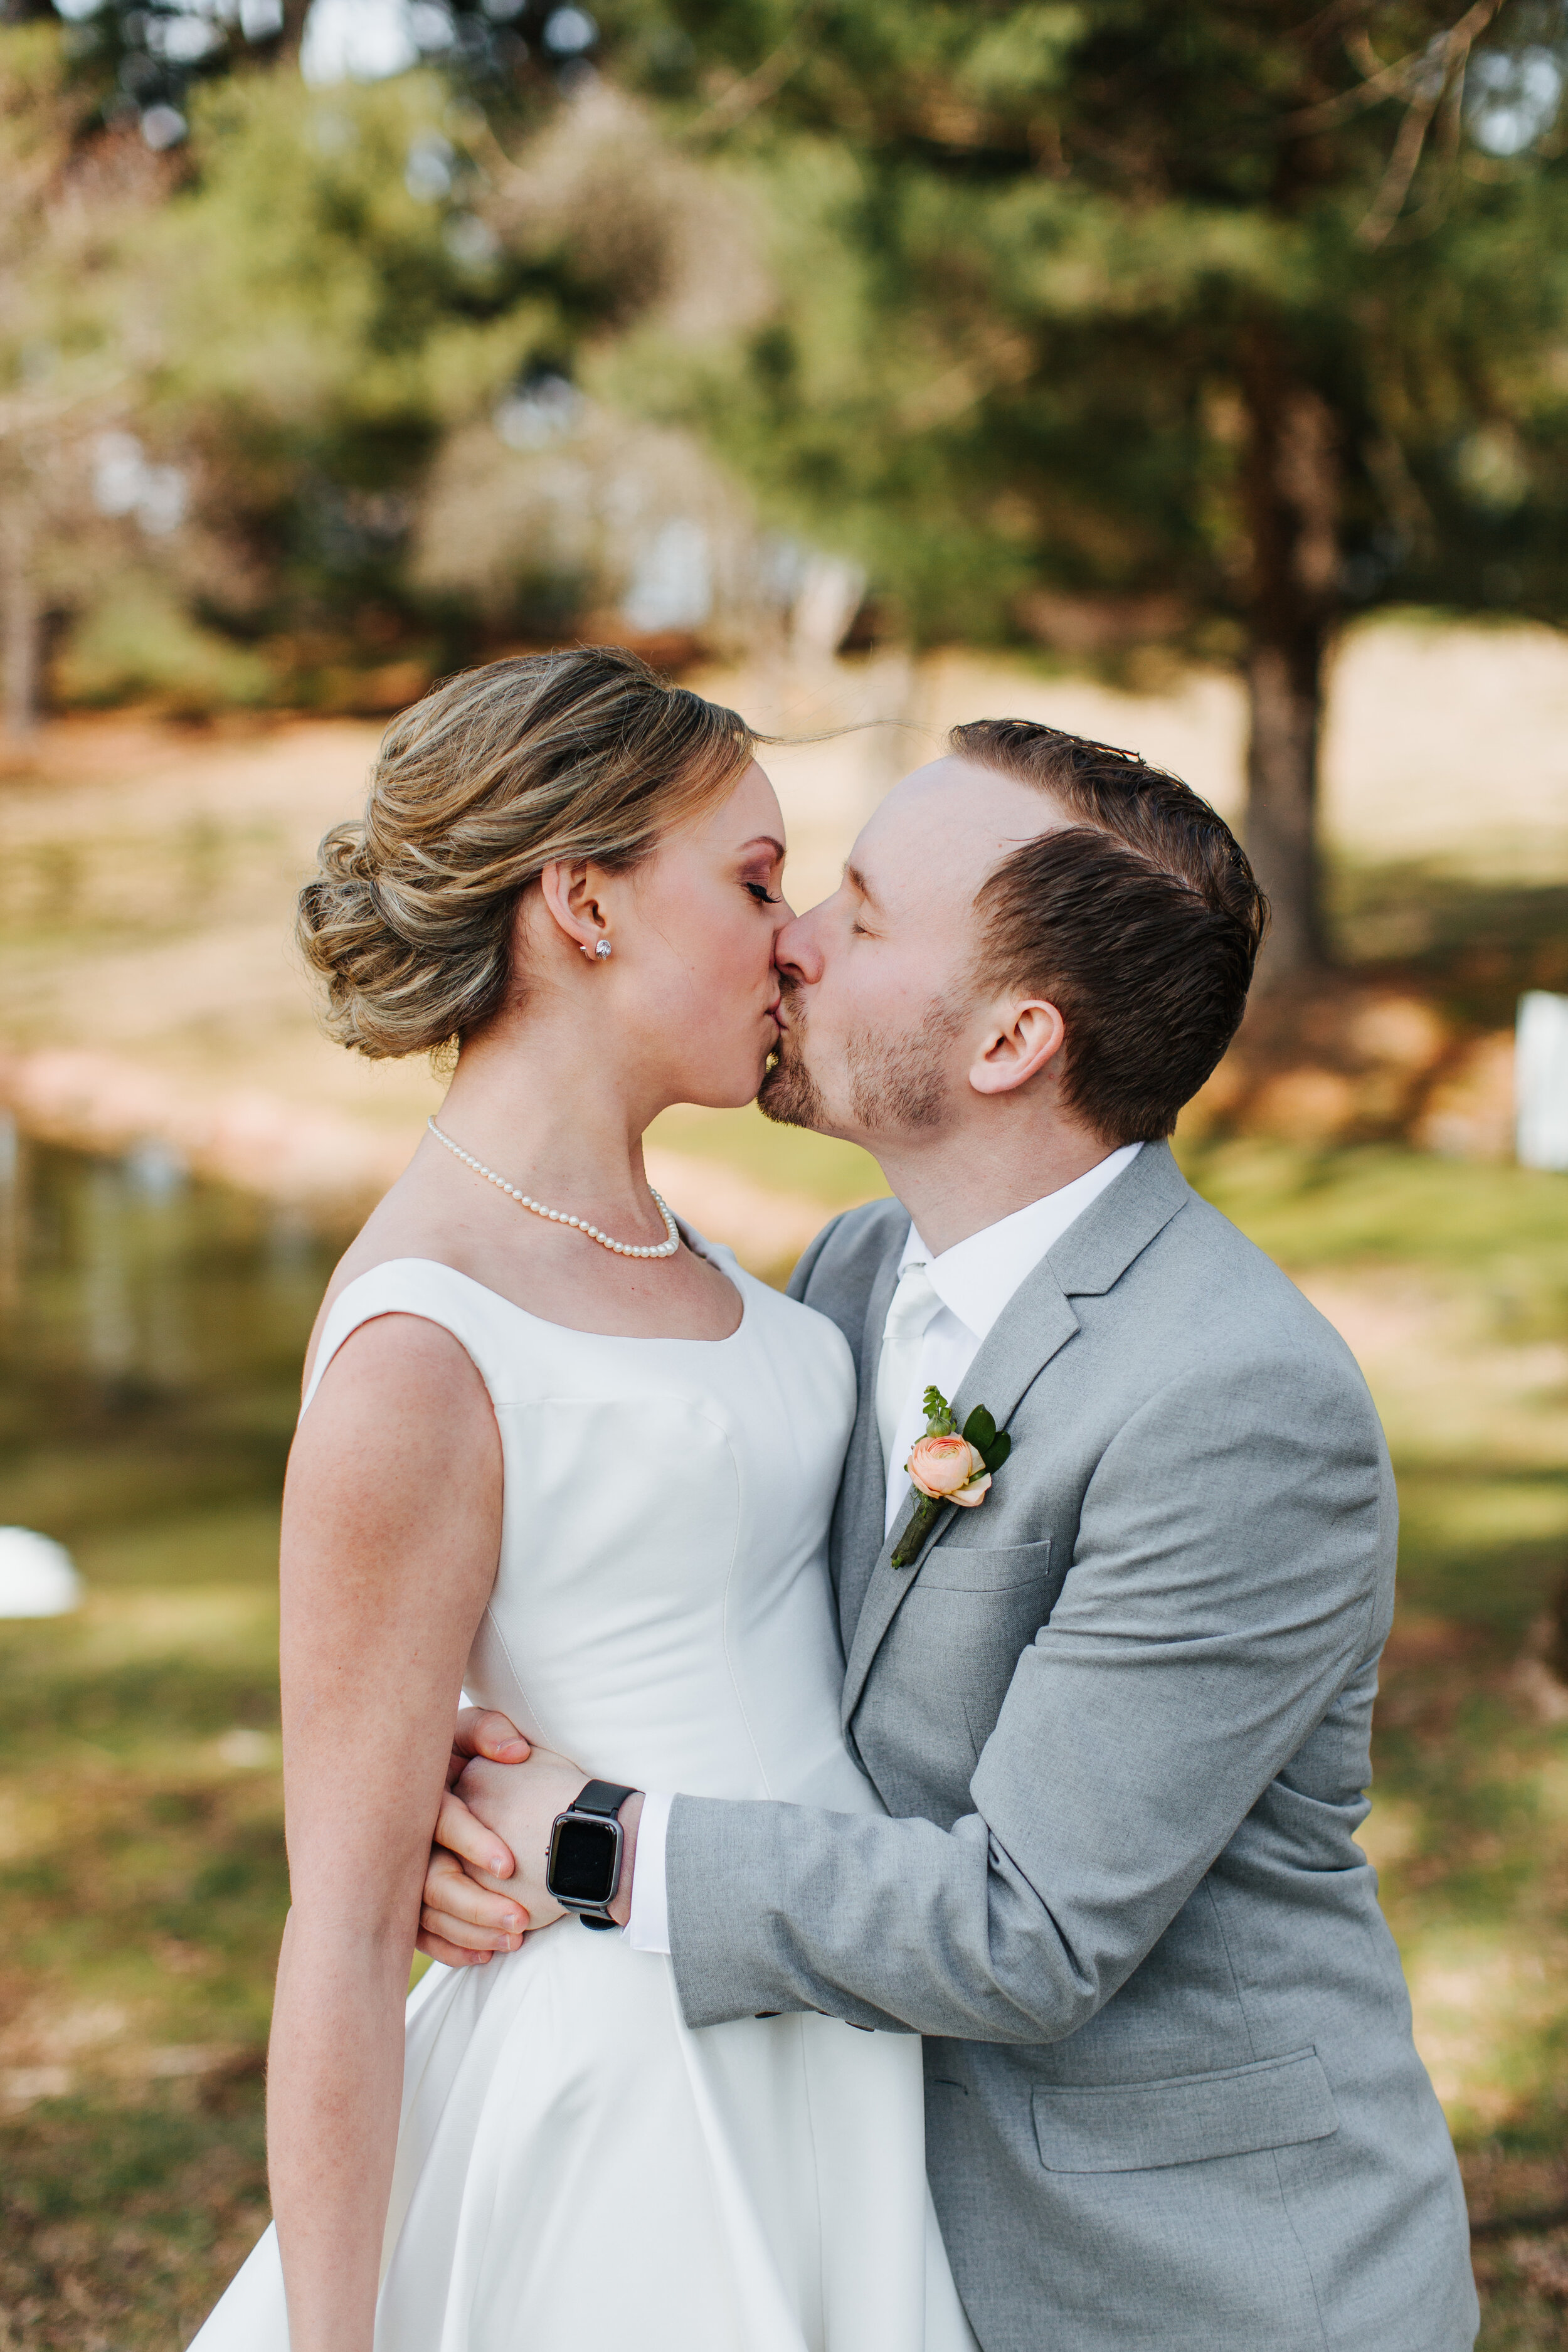 Our Wedding Story: "We never received photos from our wedding day"